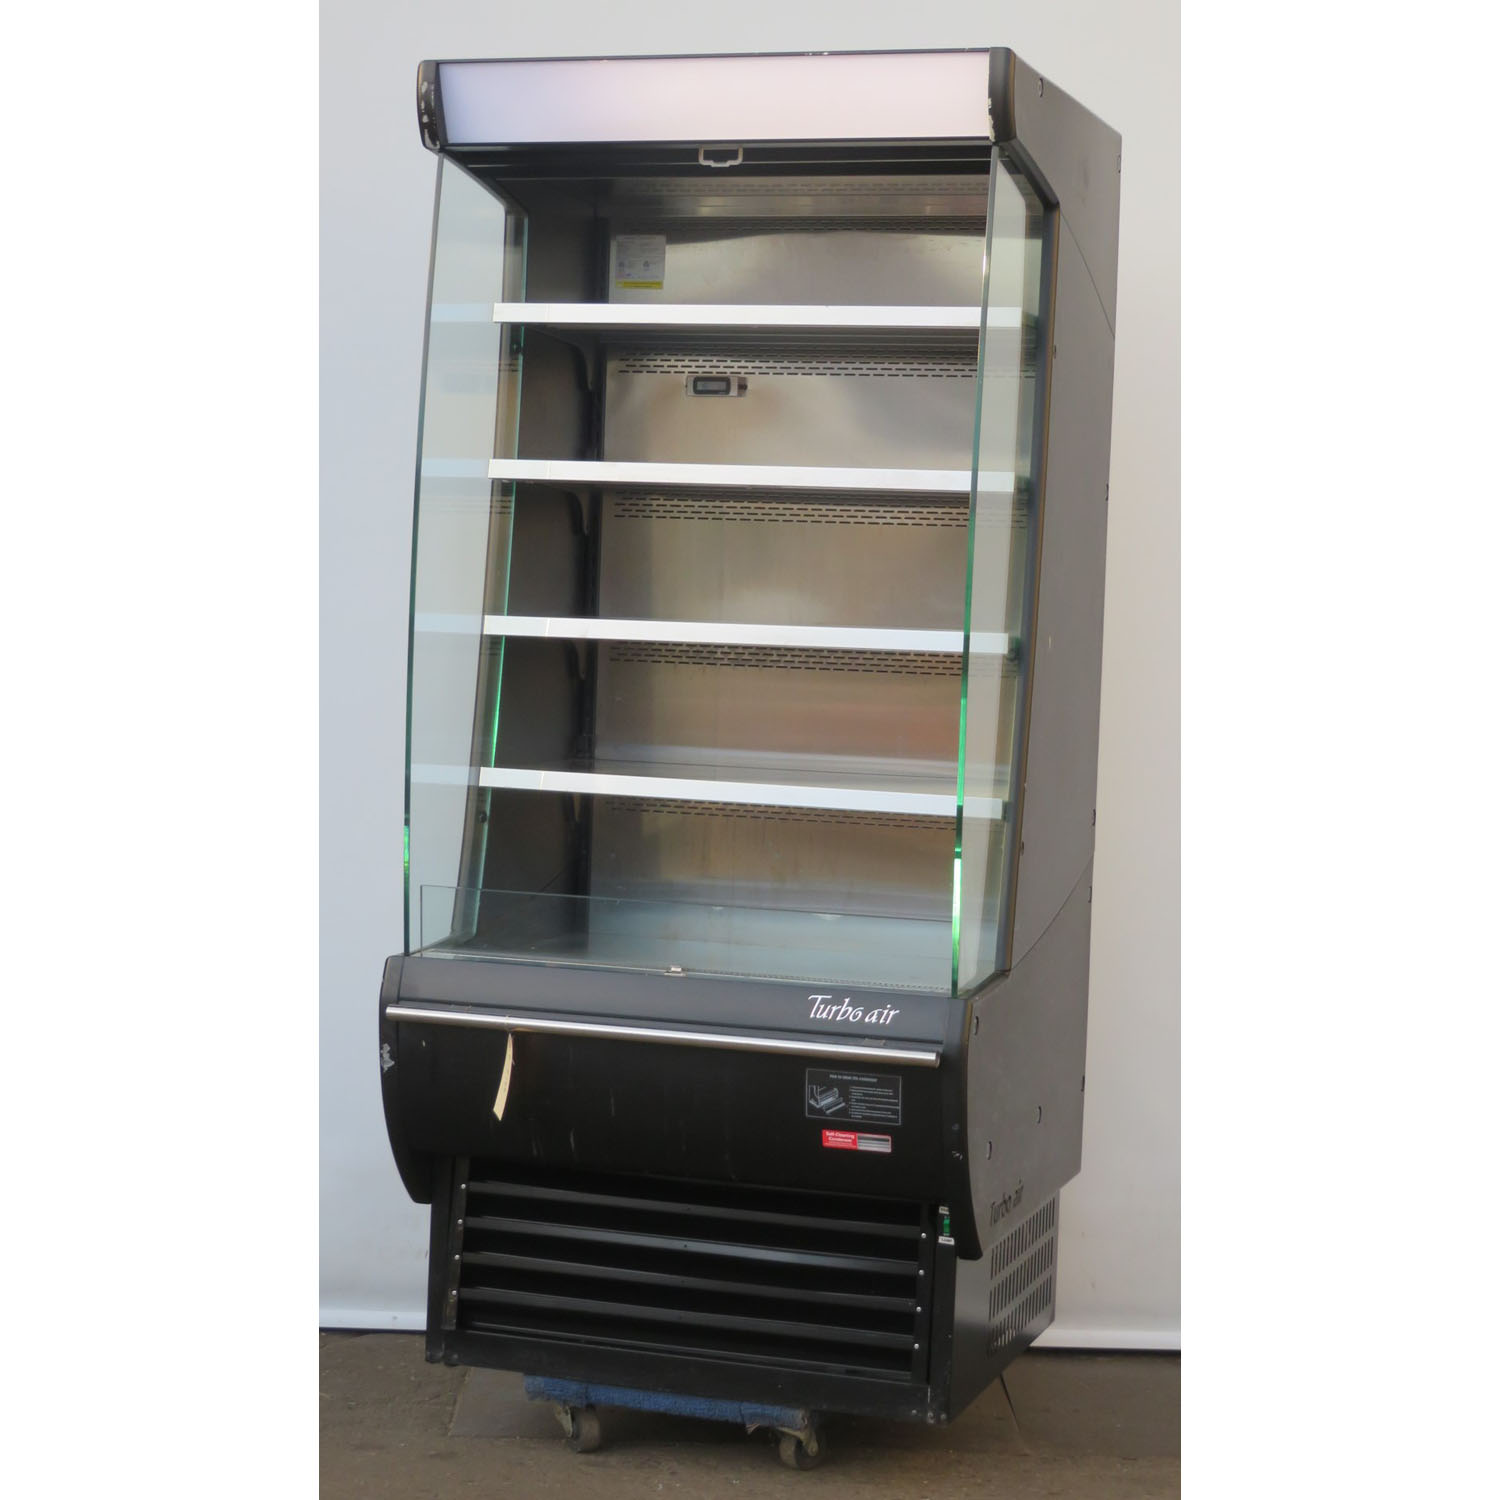 Turbo Air TOM-36DXB 36" Open Case Refrigerator, Used Excellent Condition